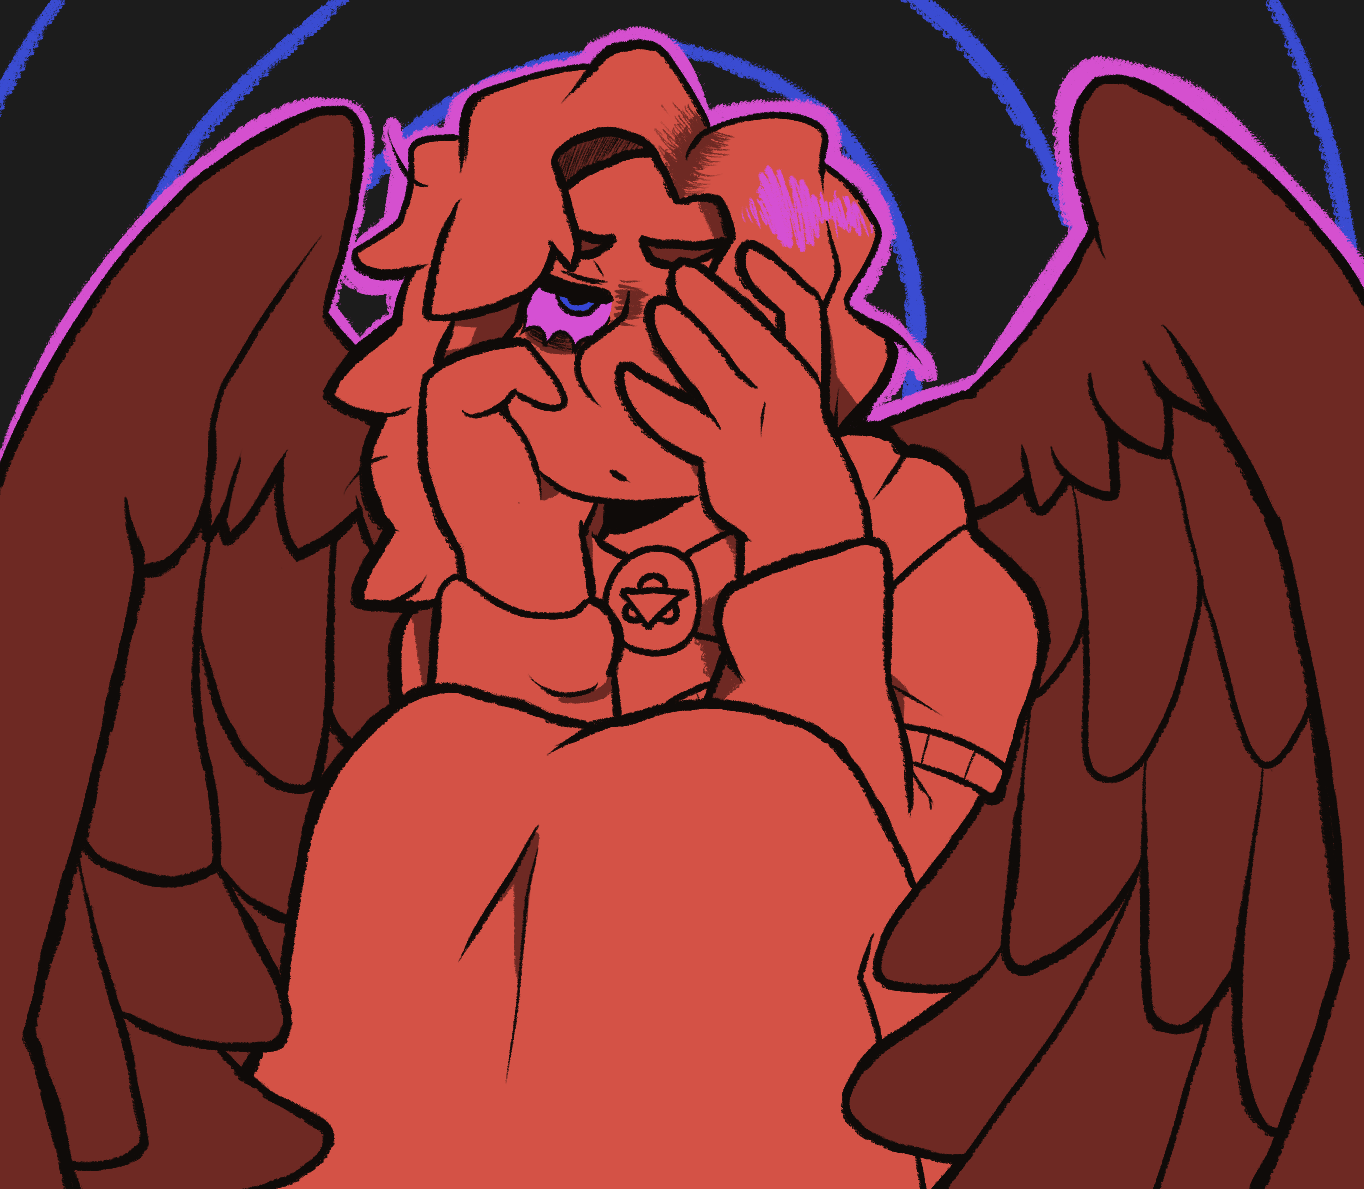 Sally Face fanart of Travis Phelps with a limited color palette. It is him as an adult, in his cult's uniform, with black fallen angel wings. He's sitting down, and is holding his own face, his right eye obscured by his hands.